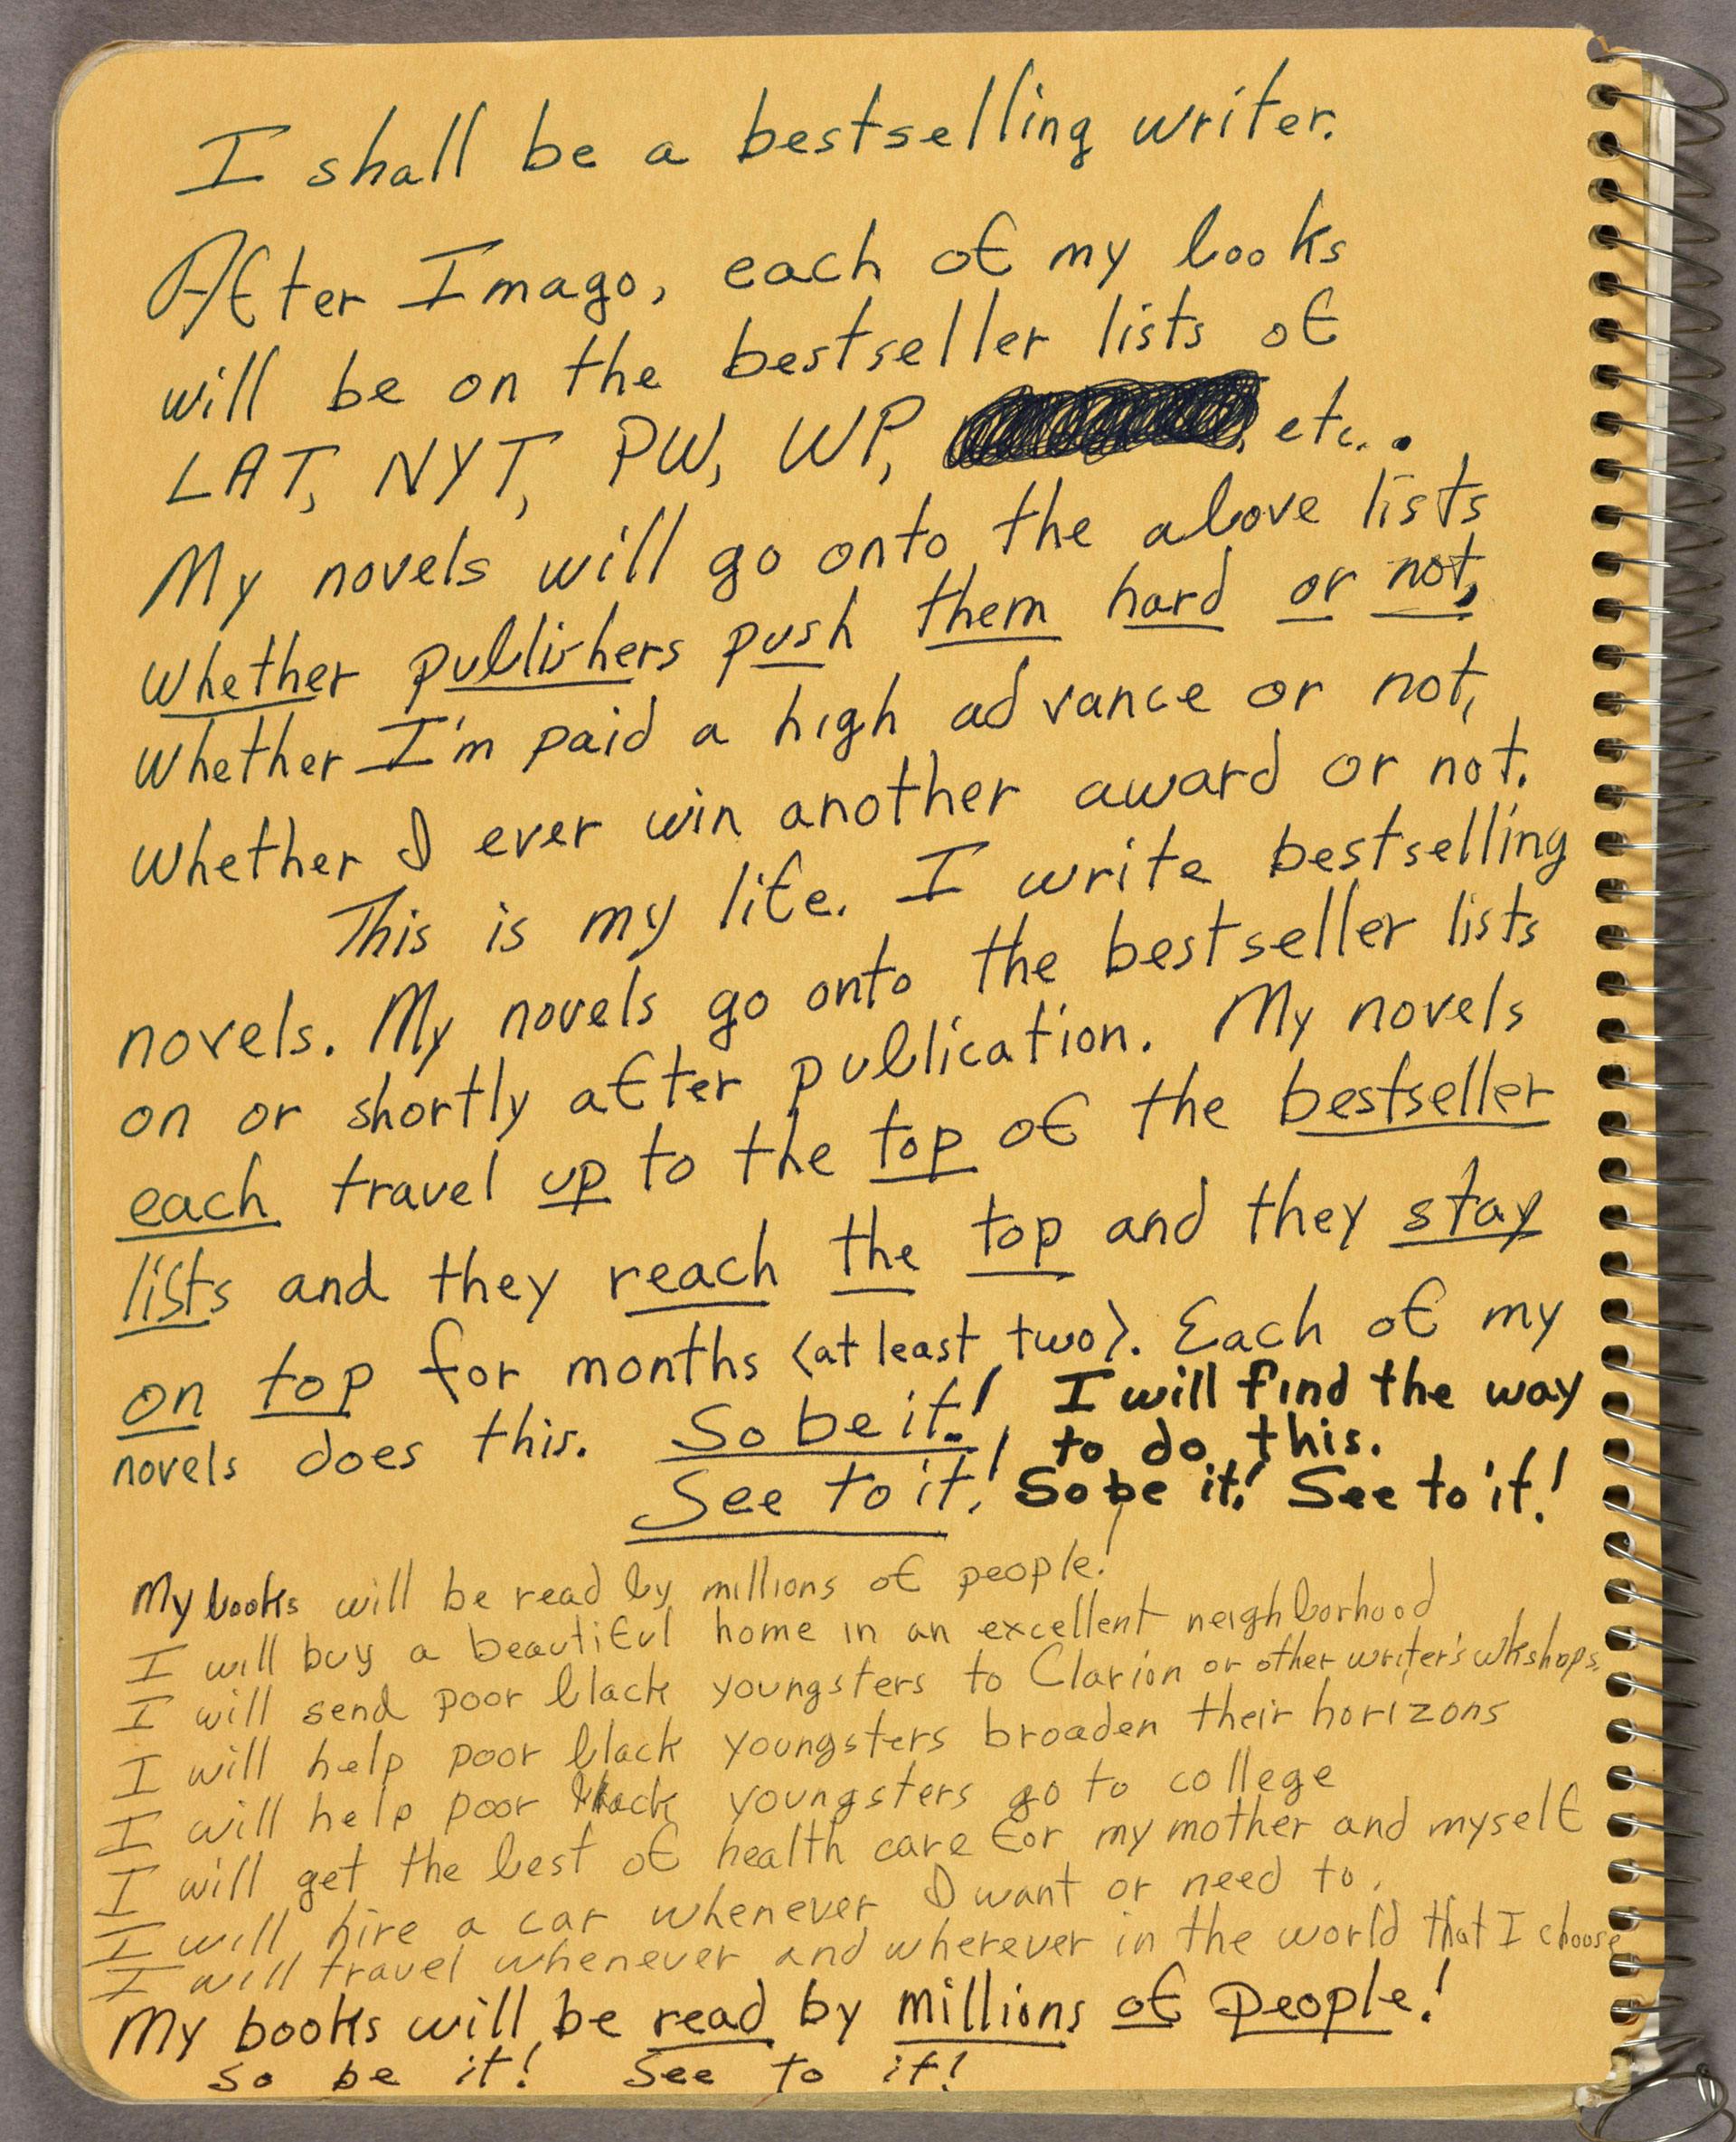 <p>Octavia E. Butler, notes on writing, “I am a bestselling writer…” 1988. Huntington Library, Art Collections, and Botanical Gardens. © Estate of Octavia E. Butler.</p>
